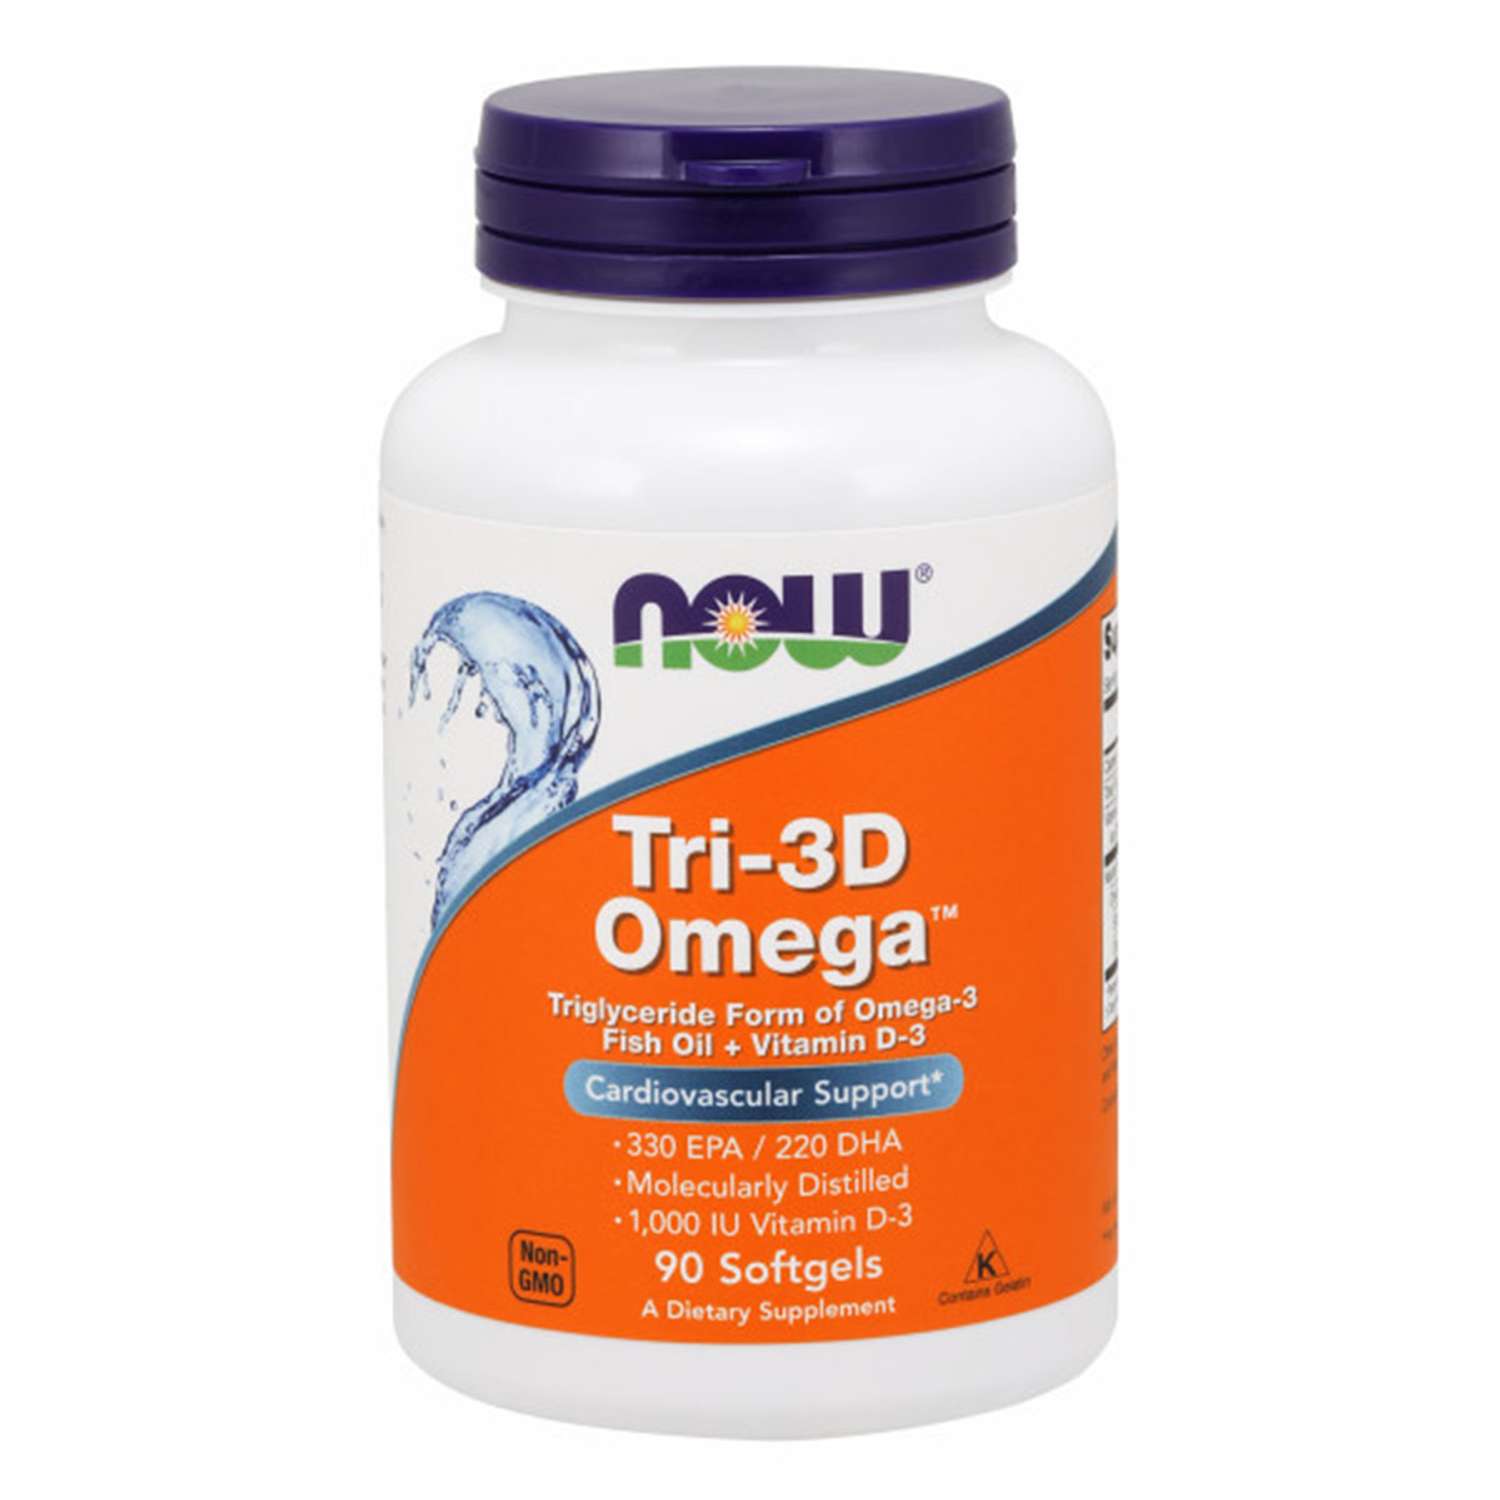 Snt omega 3 капсулы. Now foods, ультра Омега-3, 180 капсул. Now Omega-3 200 Softgels. Now Omega-3 1000 MG, 200 капс. Now Omega-3 (100 капсул).